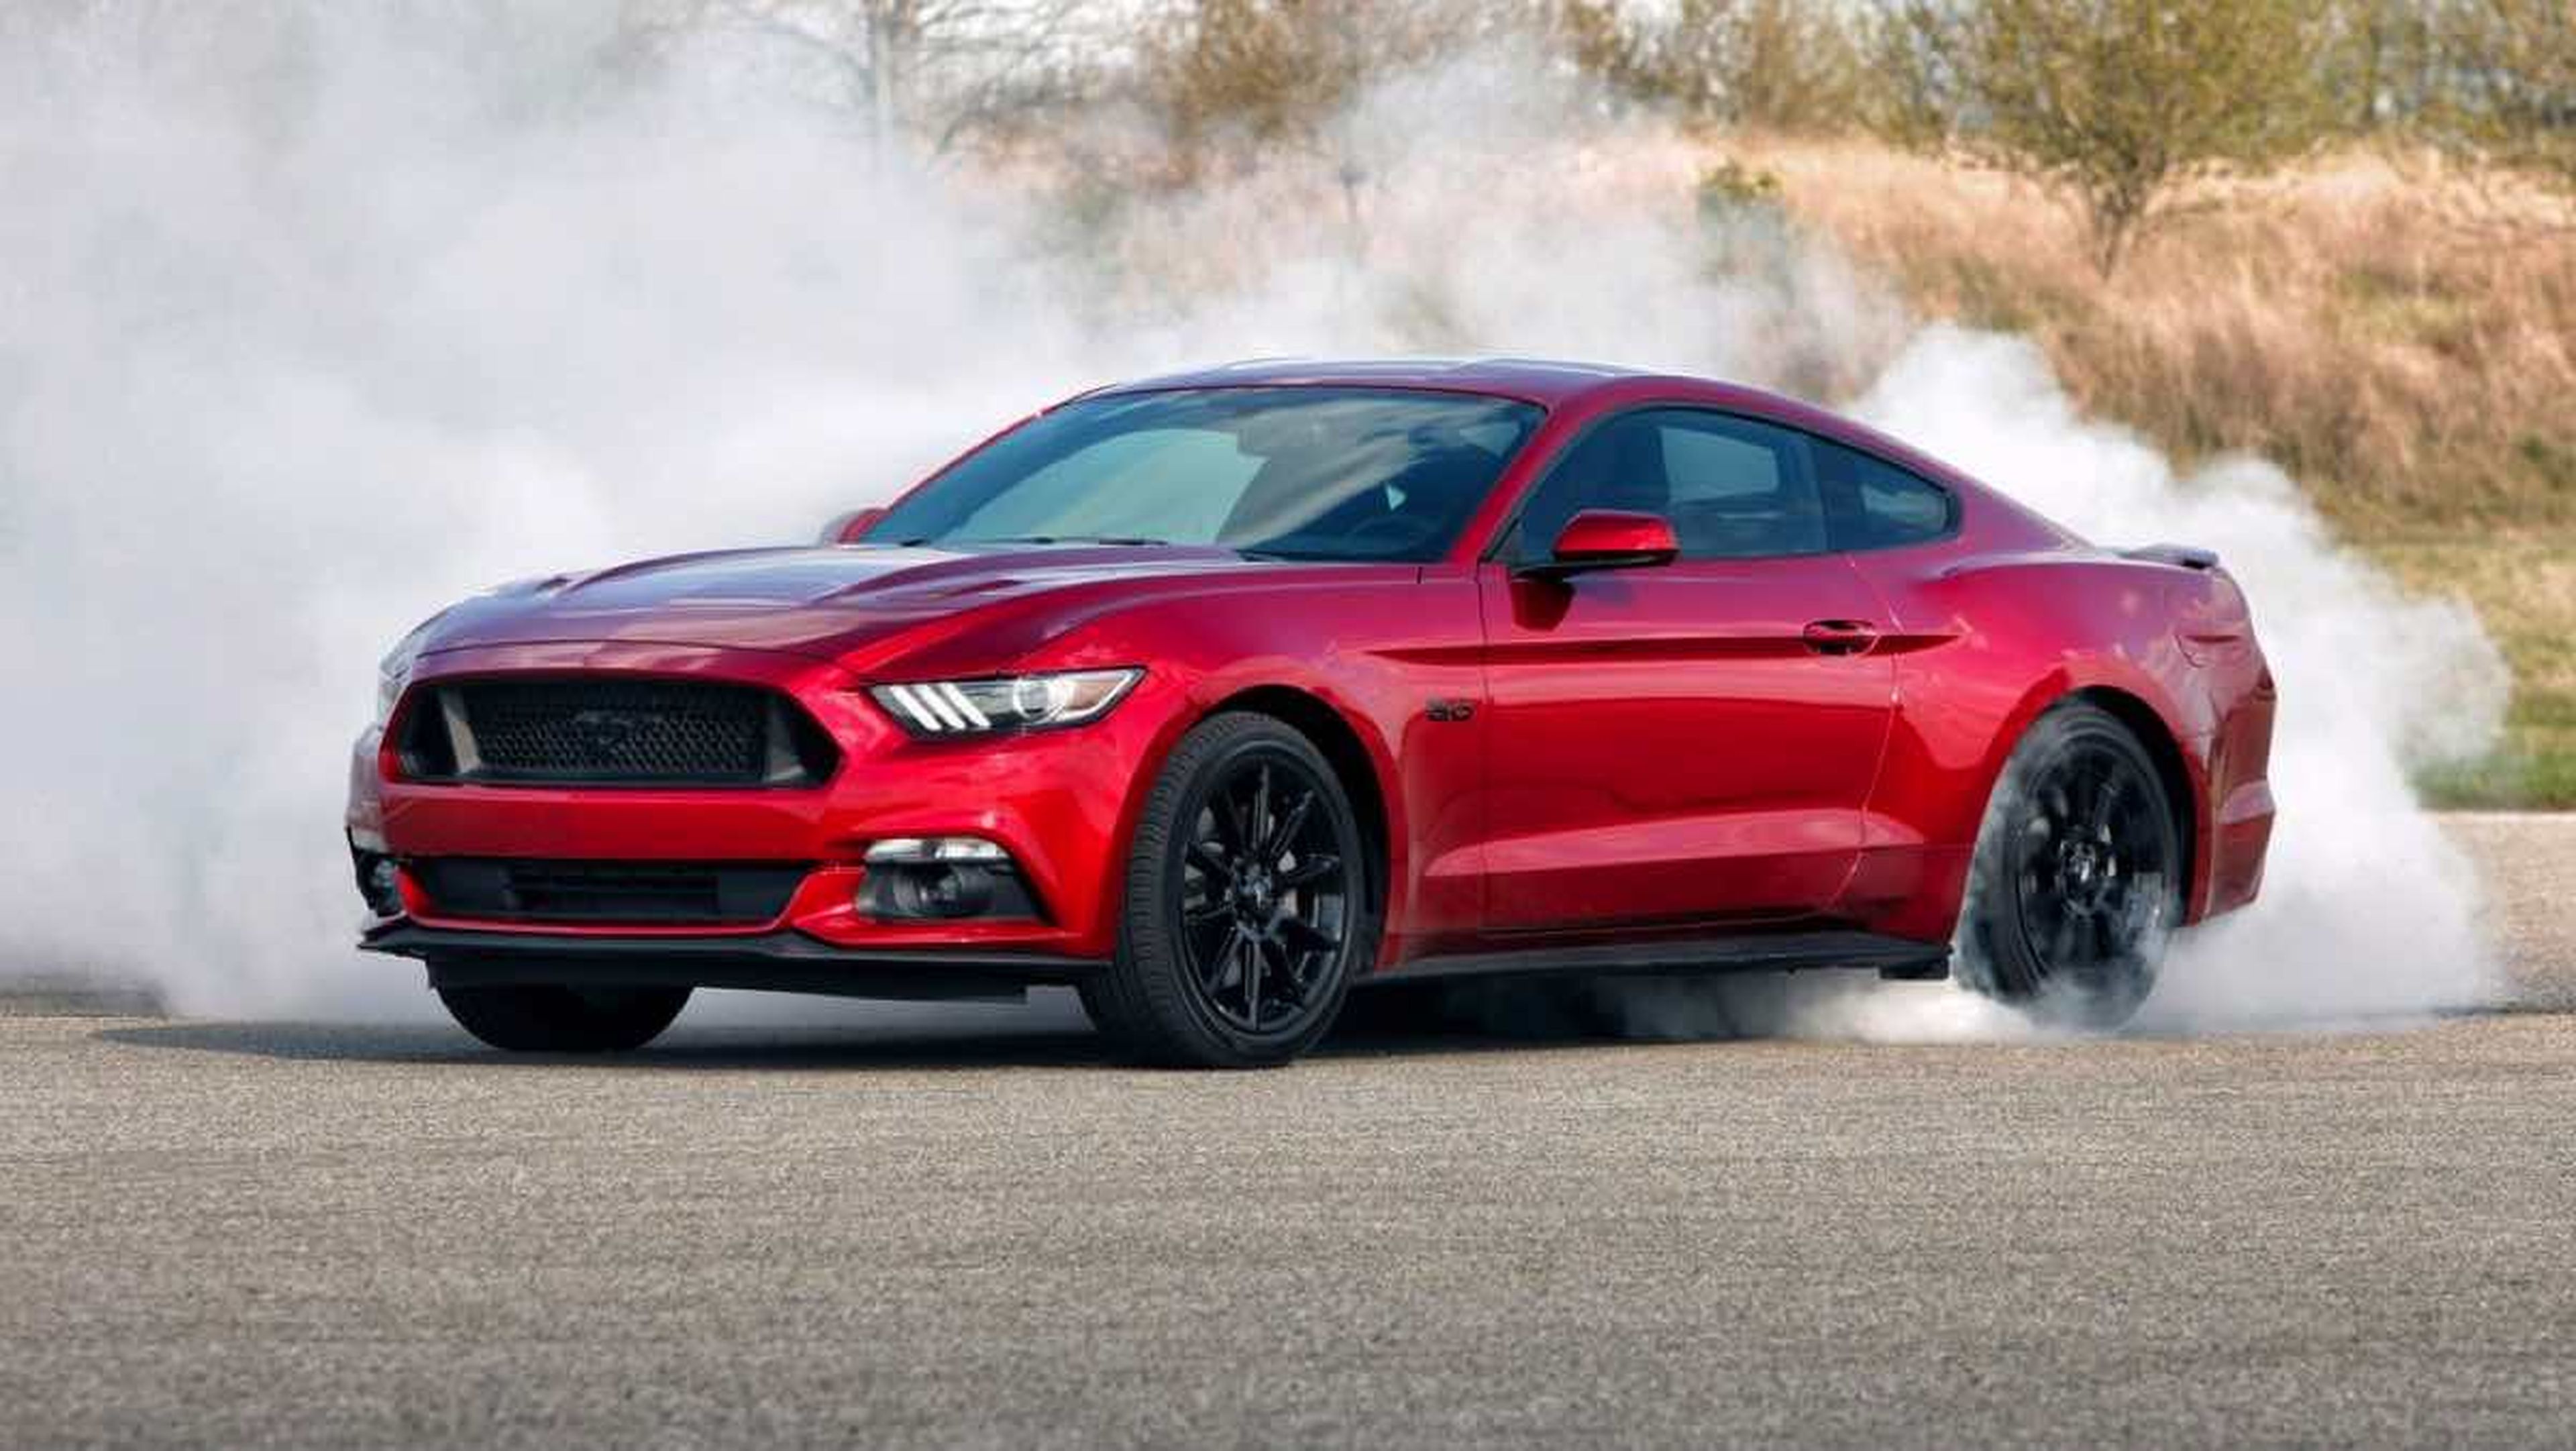 Ford Mustang: 50 unidades